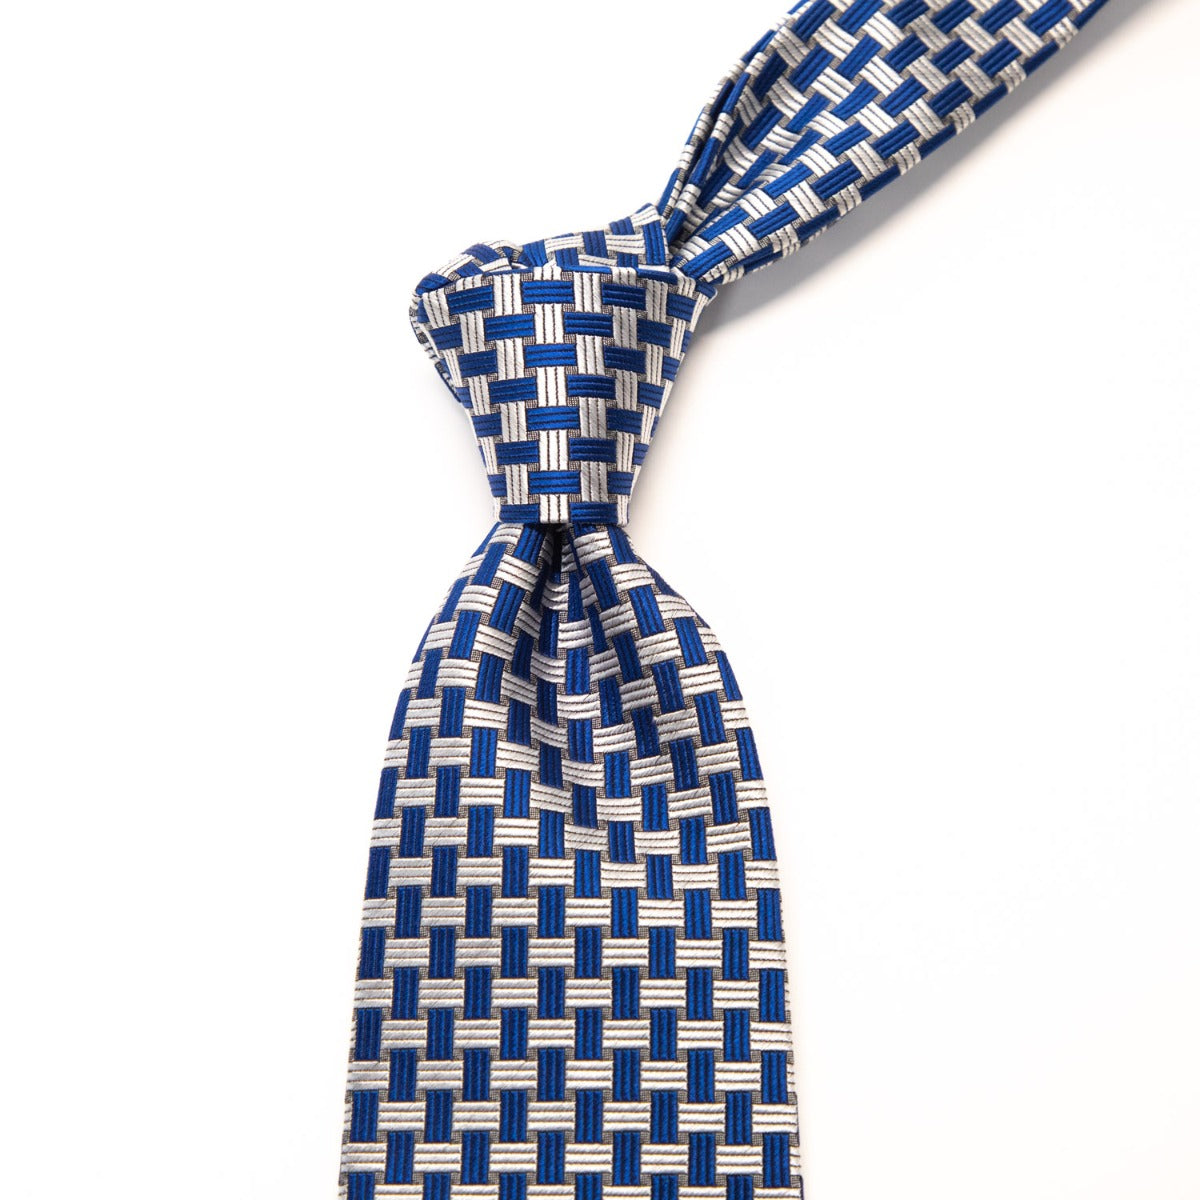 A Sovereign Grade Blue Basket Weave Silk Tie by KirbyAllison.com on a white background.